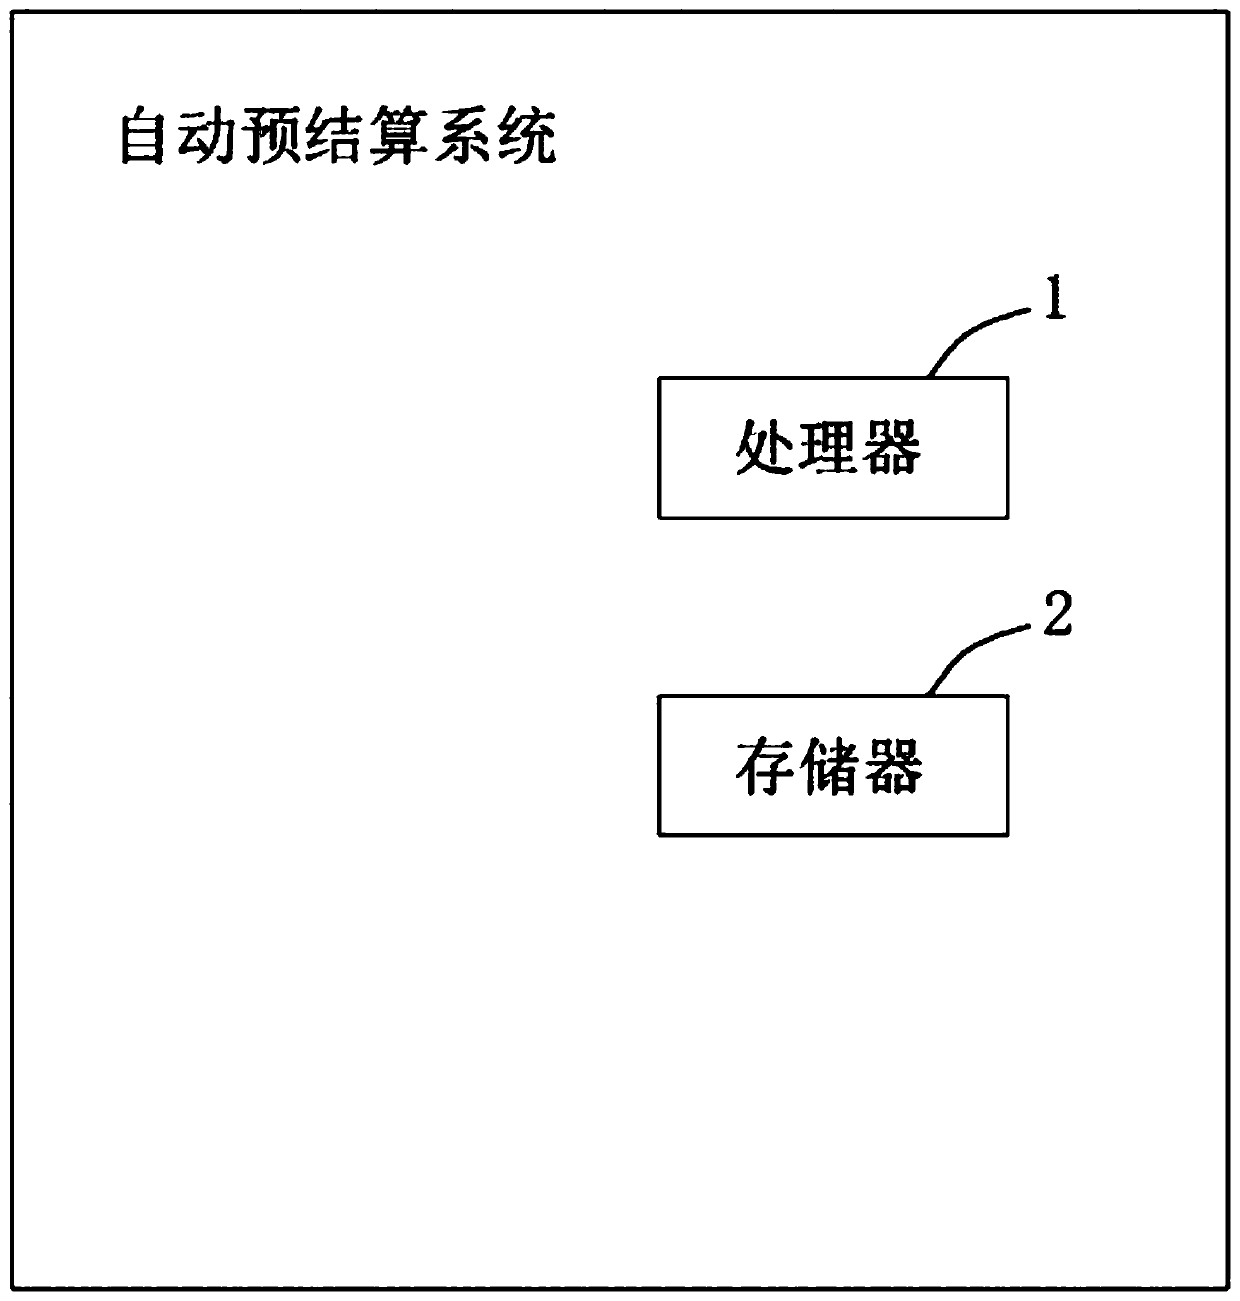 Automatic pre-settlement system and method for single-party settlement